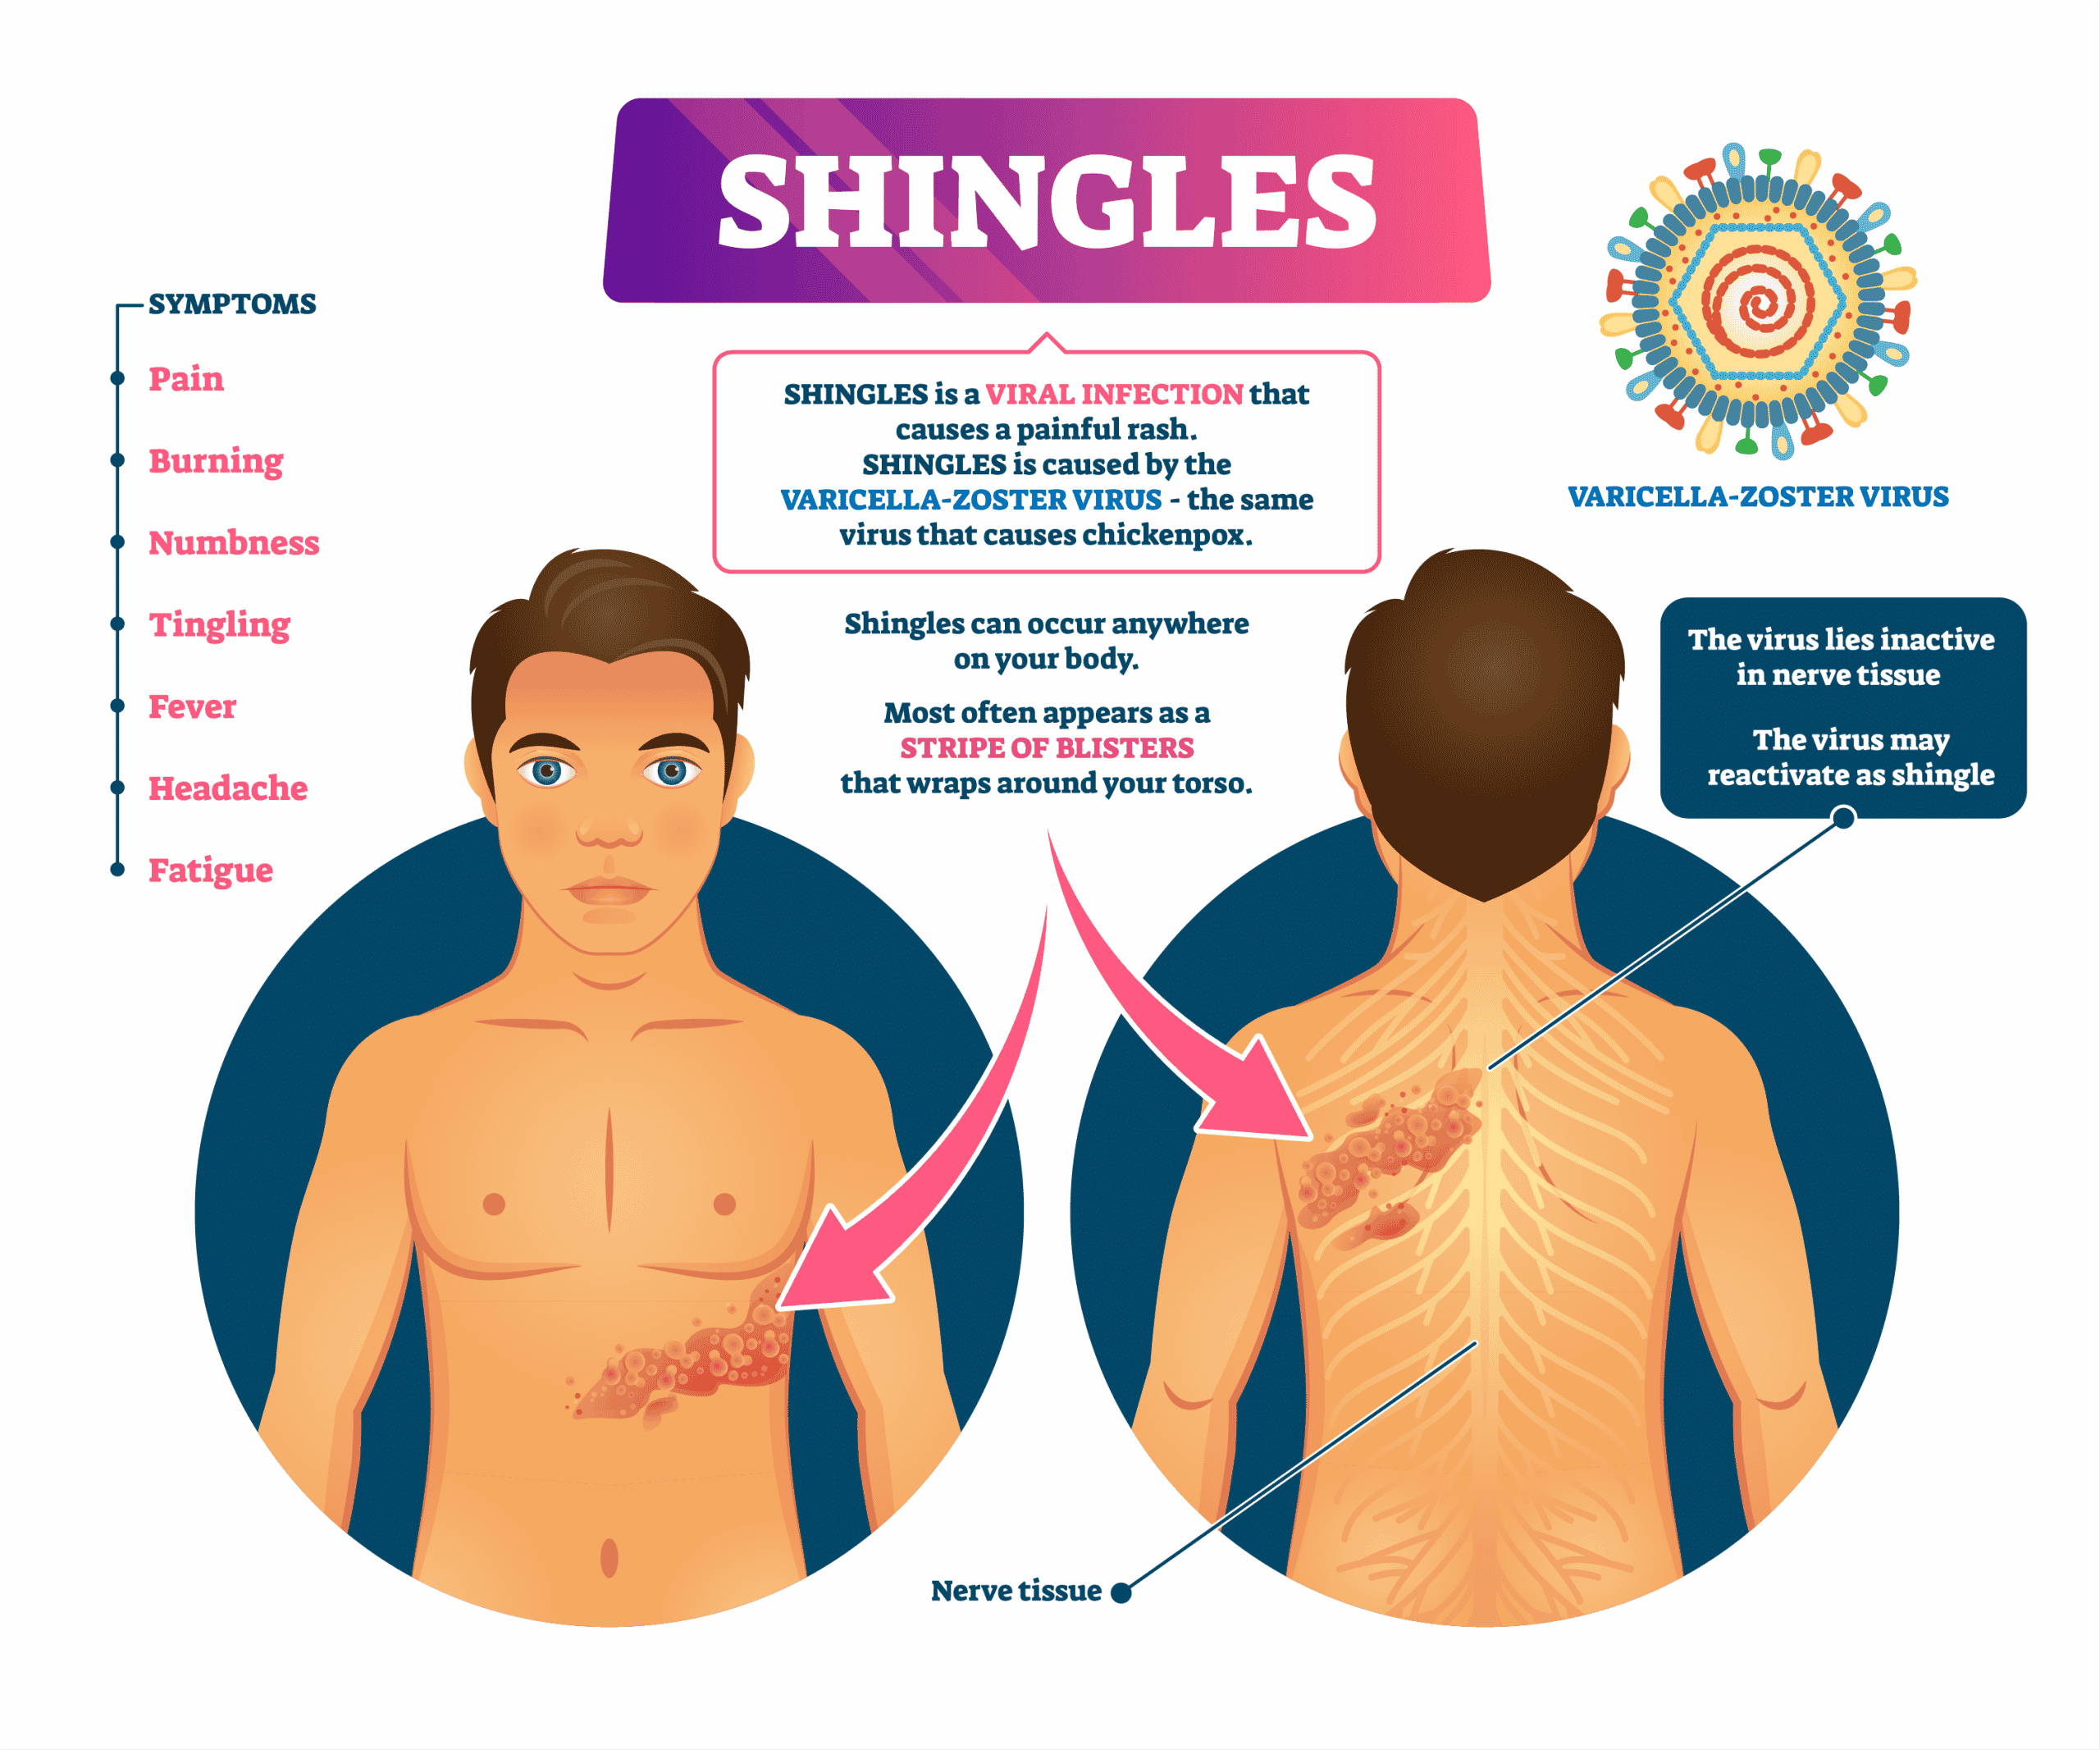 Shingles Stmptoms : Can I Still Get Herpes Zoster Shingles After ...